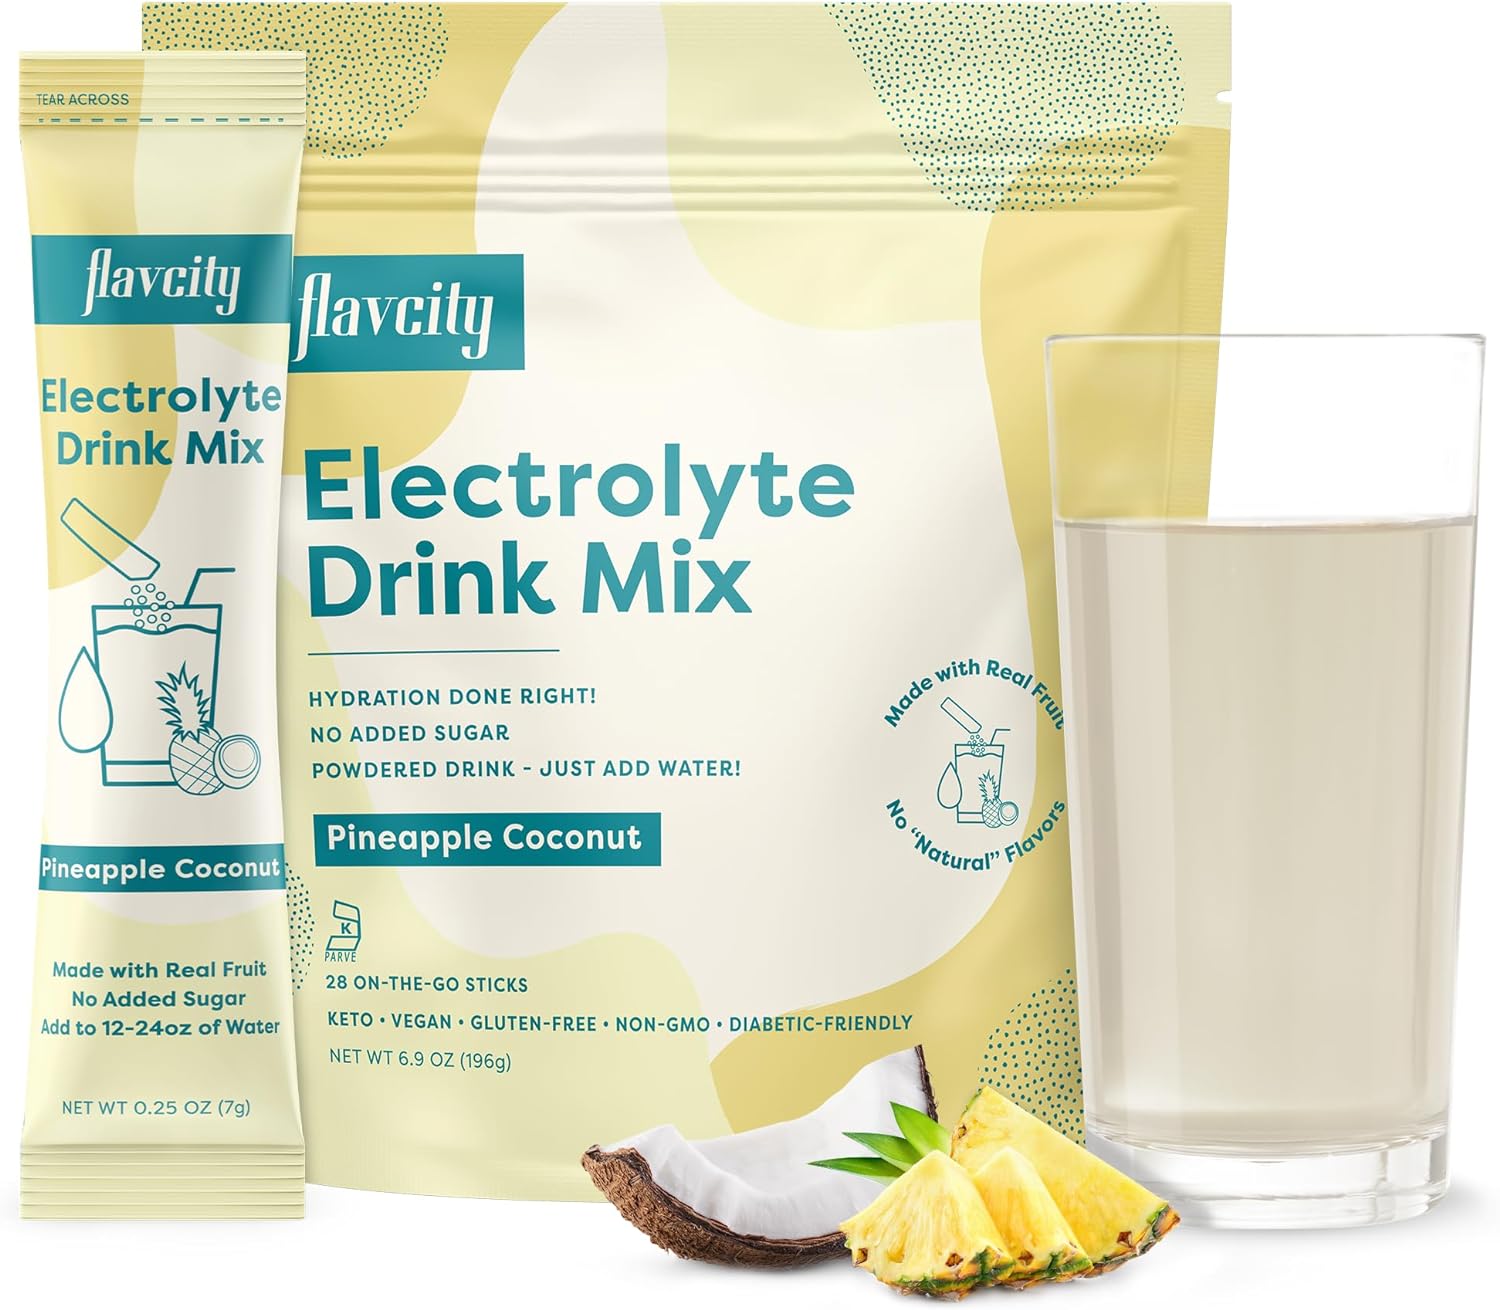 FlavCity Pineapple Coconut Electrolytes Drink Mix, 28 On-The-Go Stick Packs - Healthy Electrolytes Powder Packets Made with Real Fruit - Keto Powdered Drink with No Added Sugar, Gluten-Free